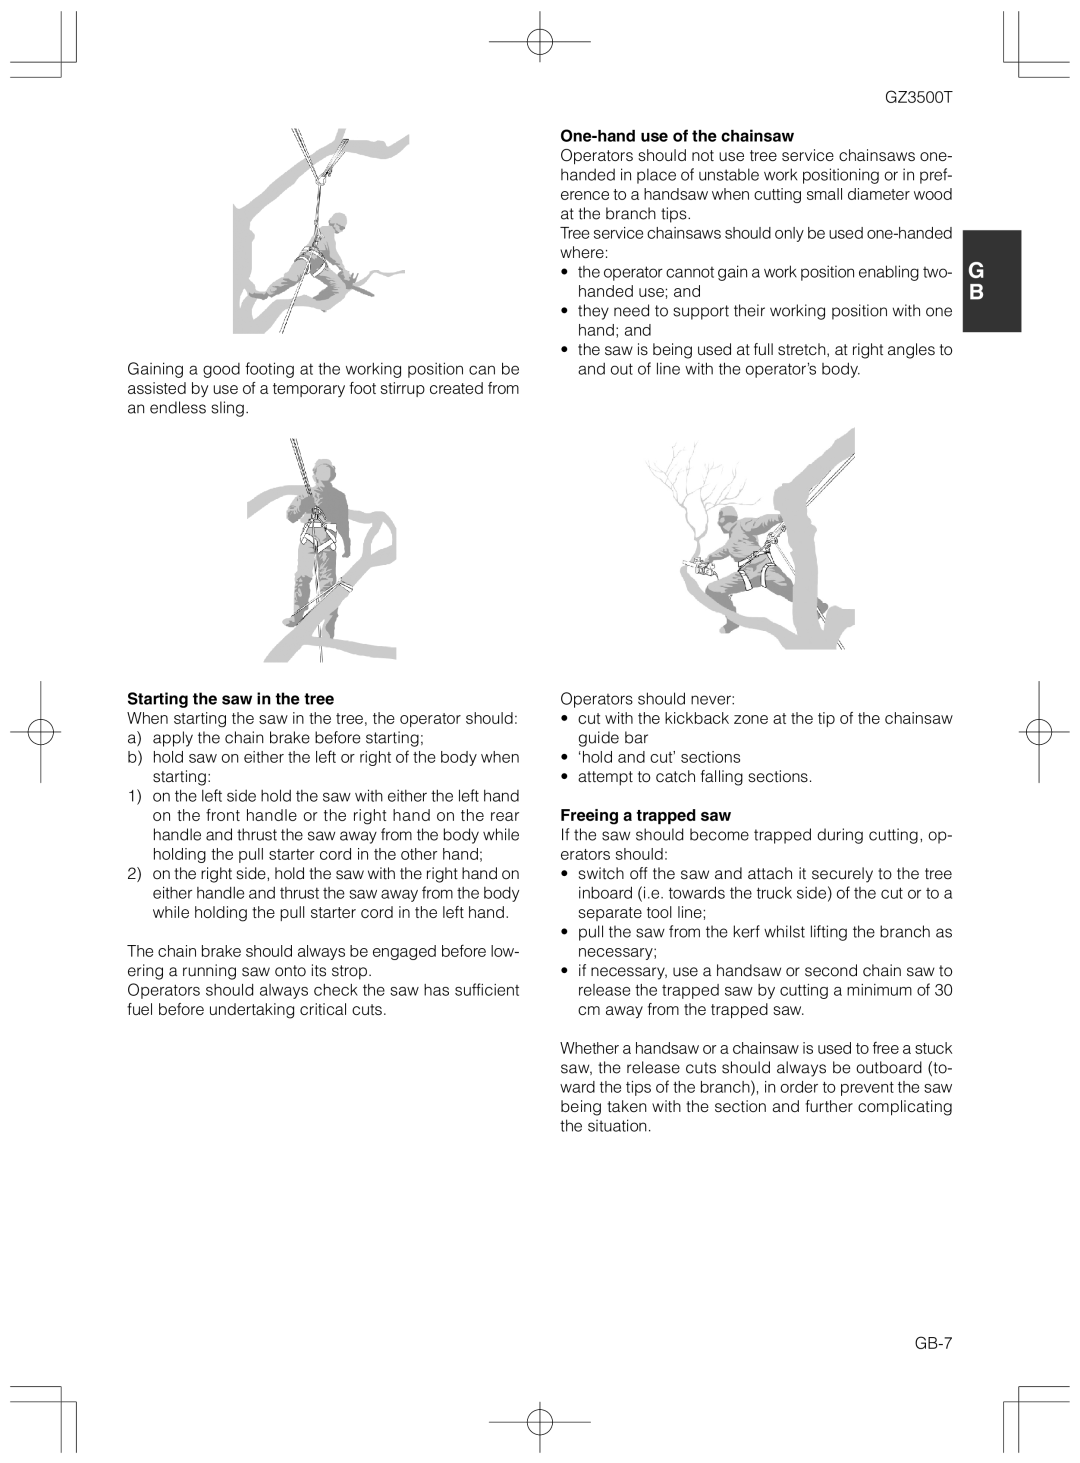 Zenoah GZ3500T owner manual Starting the saw in the tree, One-hand use of the chainsaw, Freeing a trapped saw 